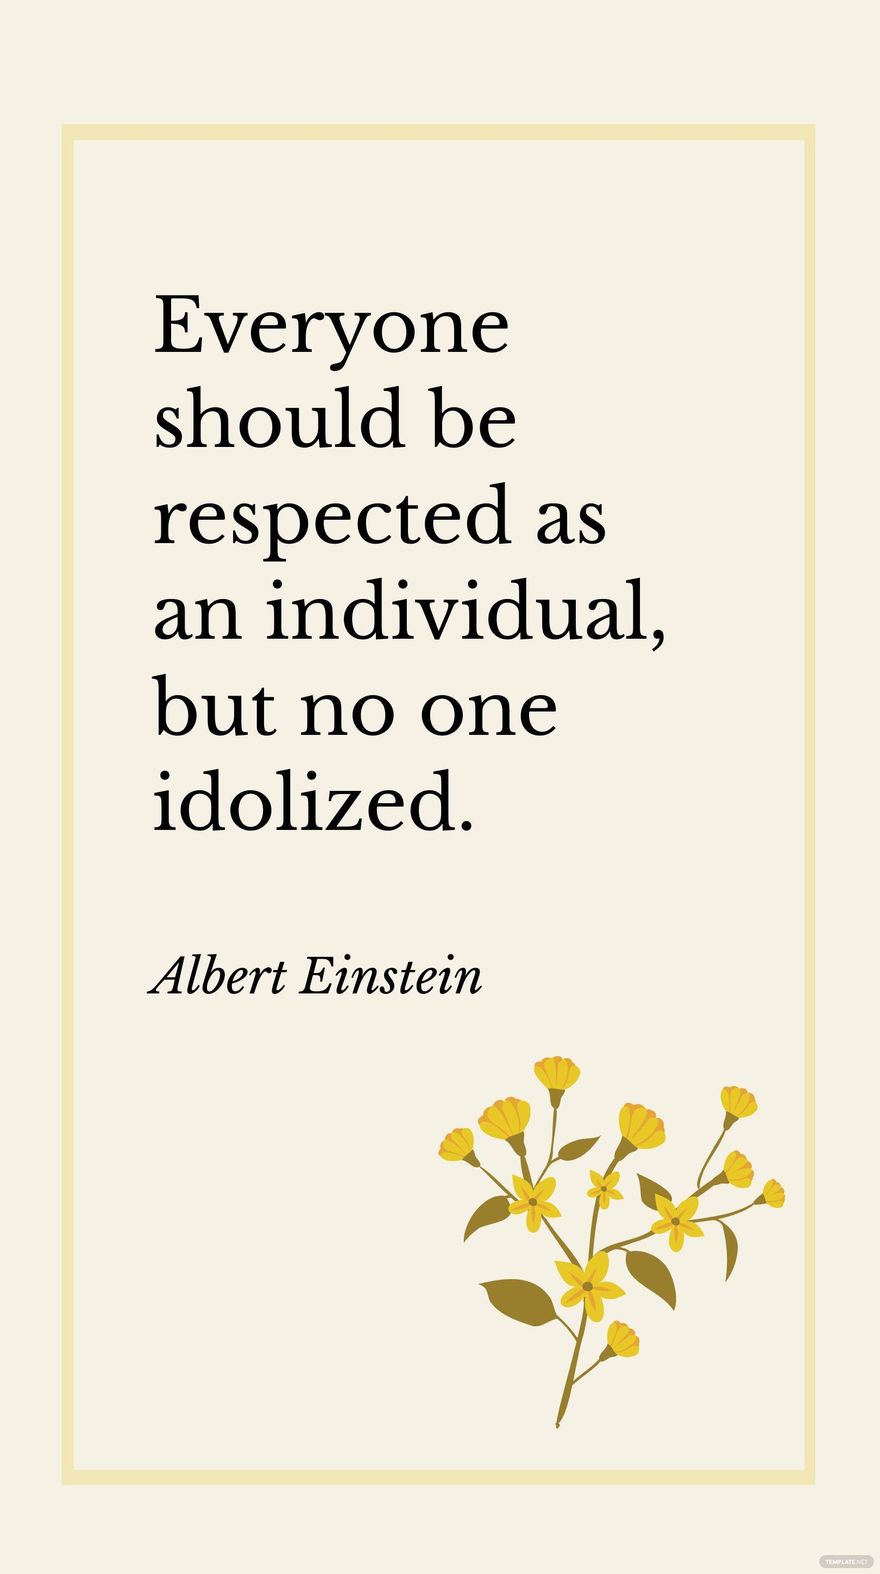 Albert Einstein - Everyone should be respected as an individual, but no one idolized.